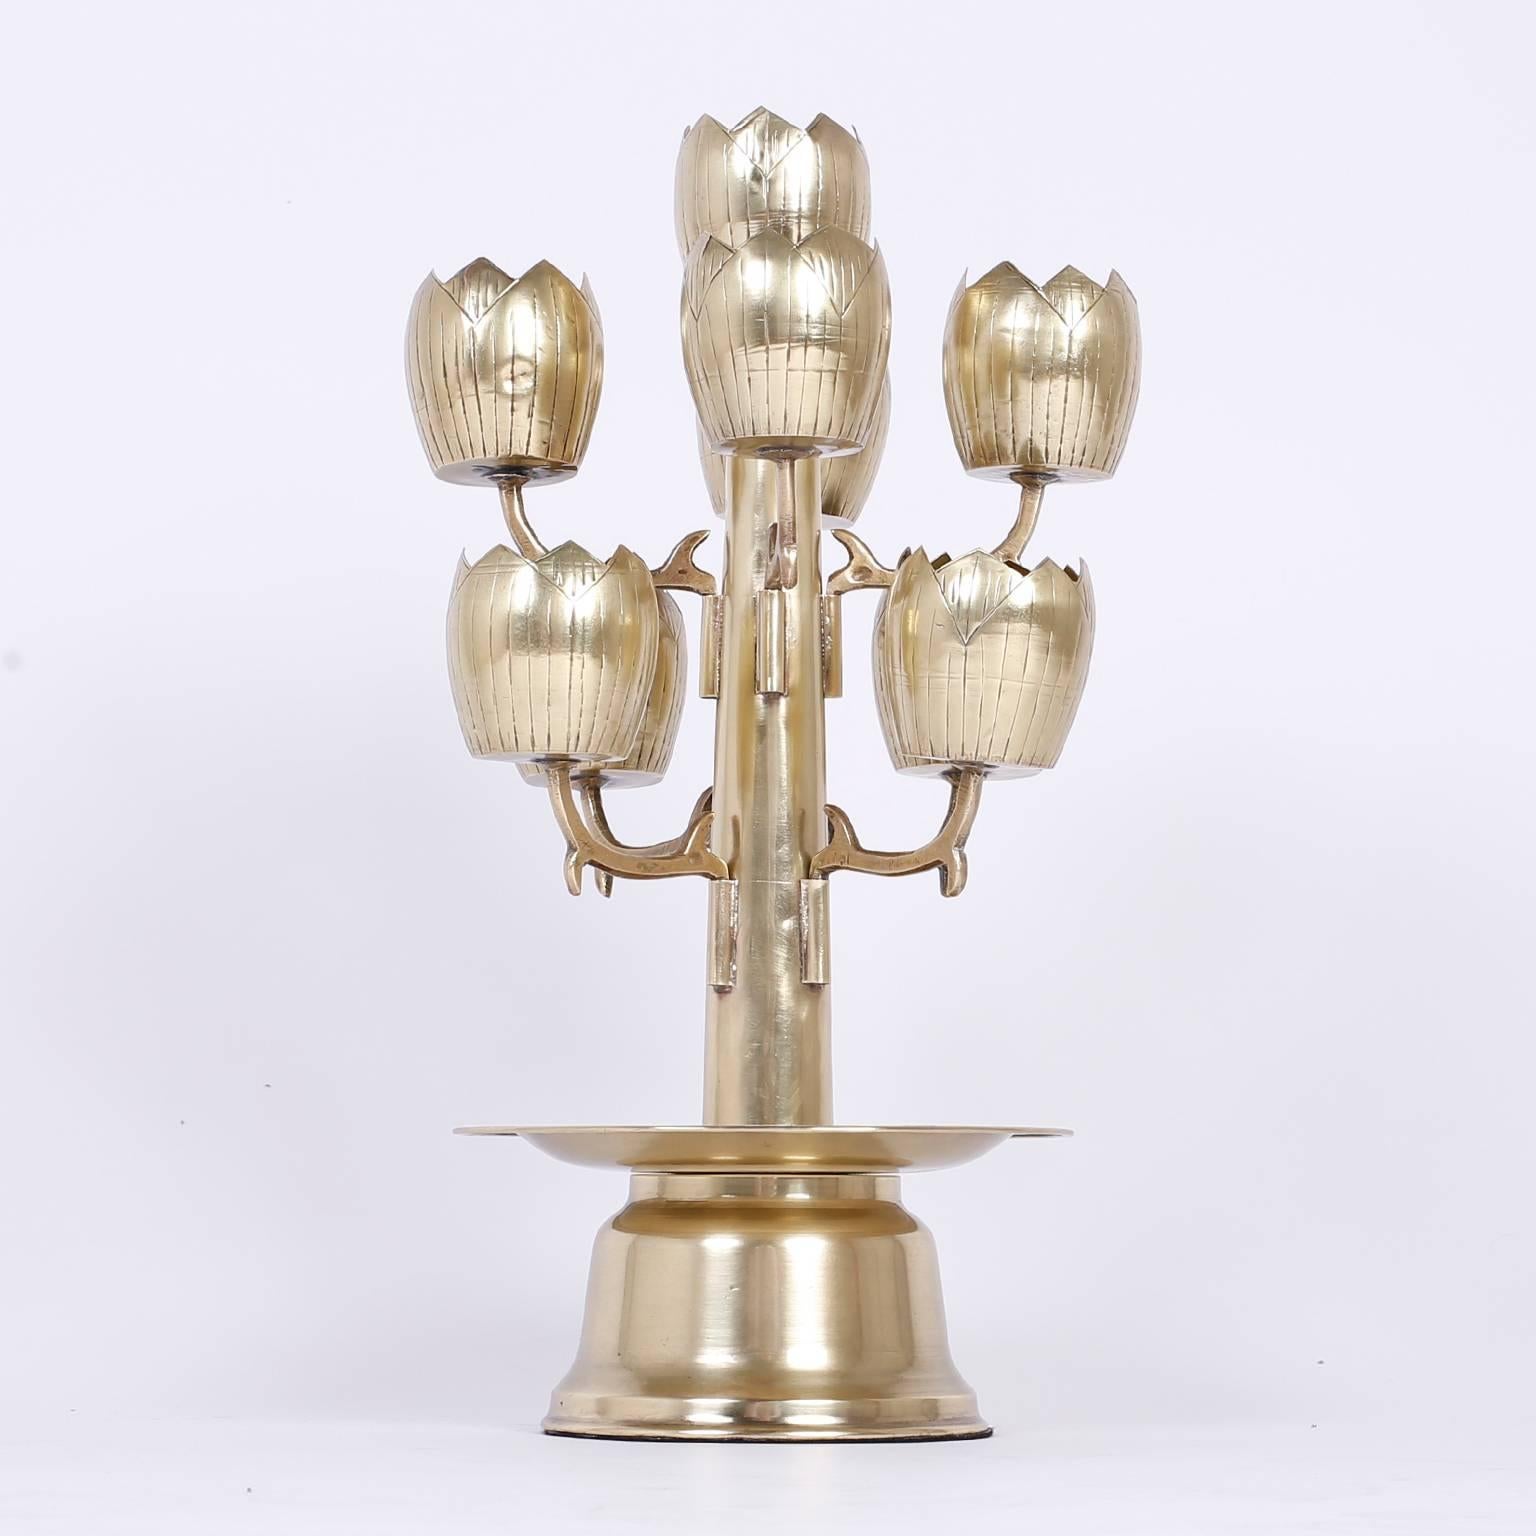 Set a romantic mood with this unusual midcentury brass candelabra having seven tulip or lotus flowers designed to hold votive candles. Hand polished and lacquered for easy care.